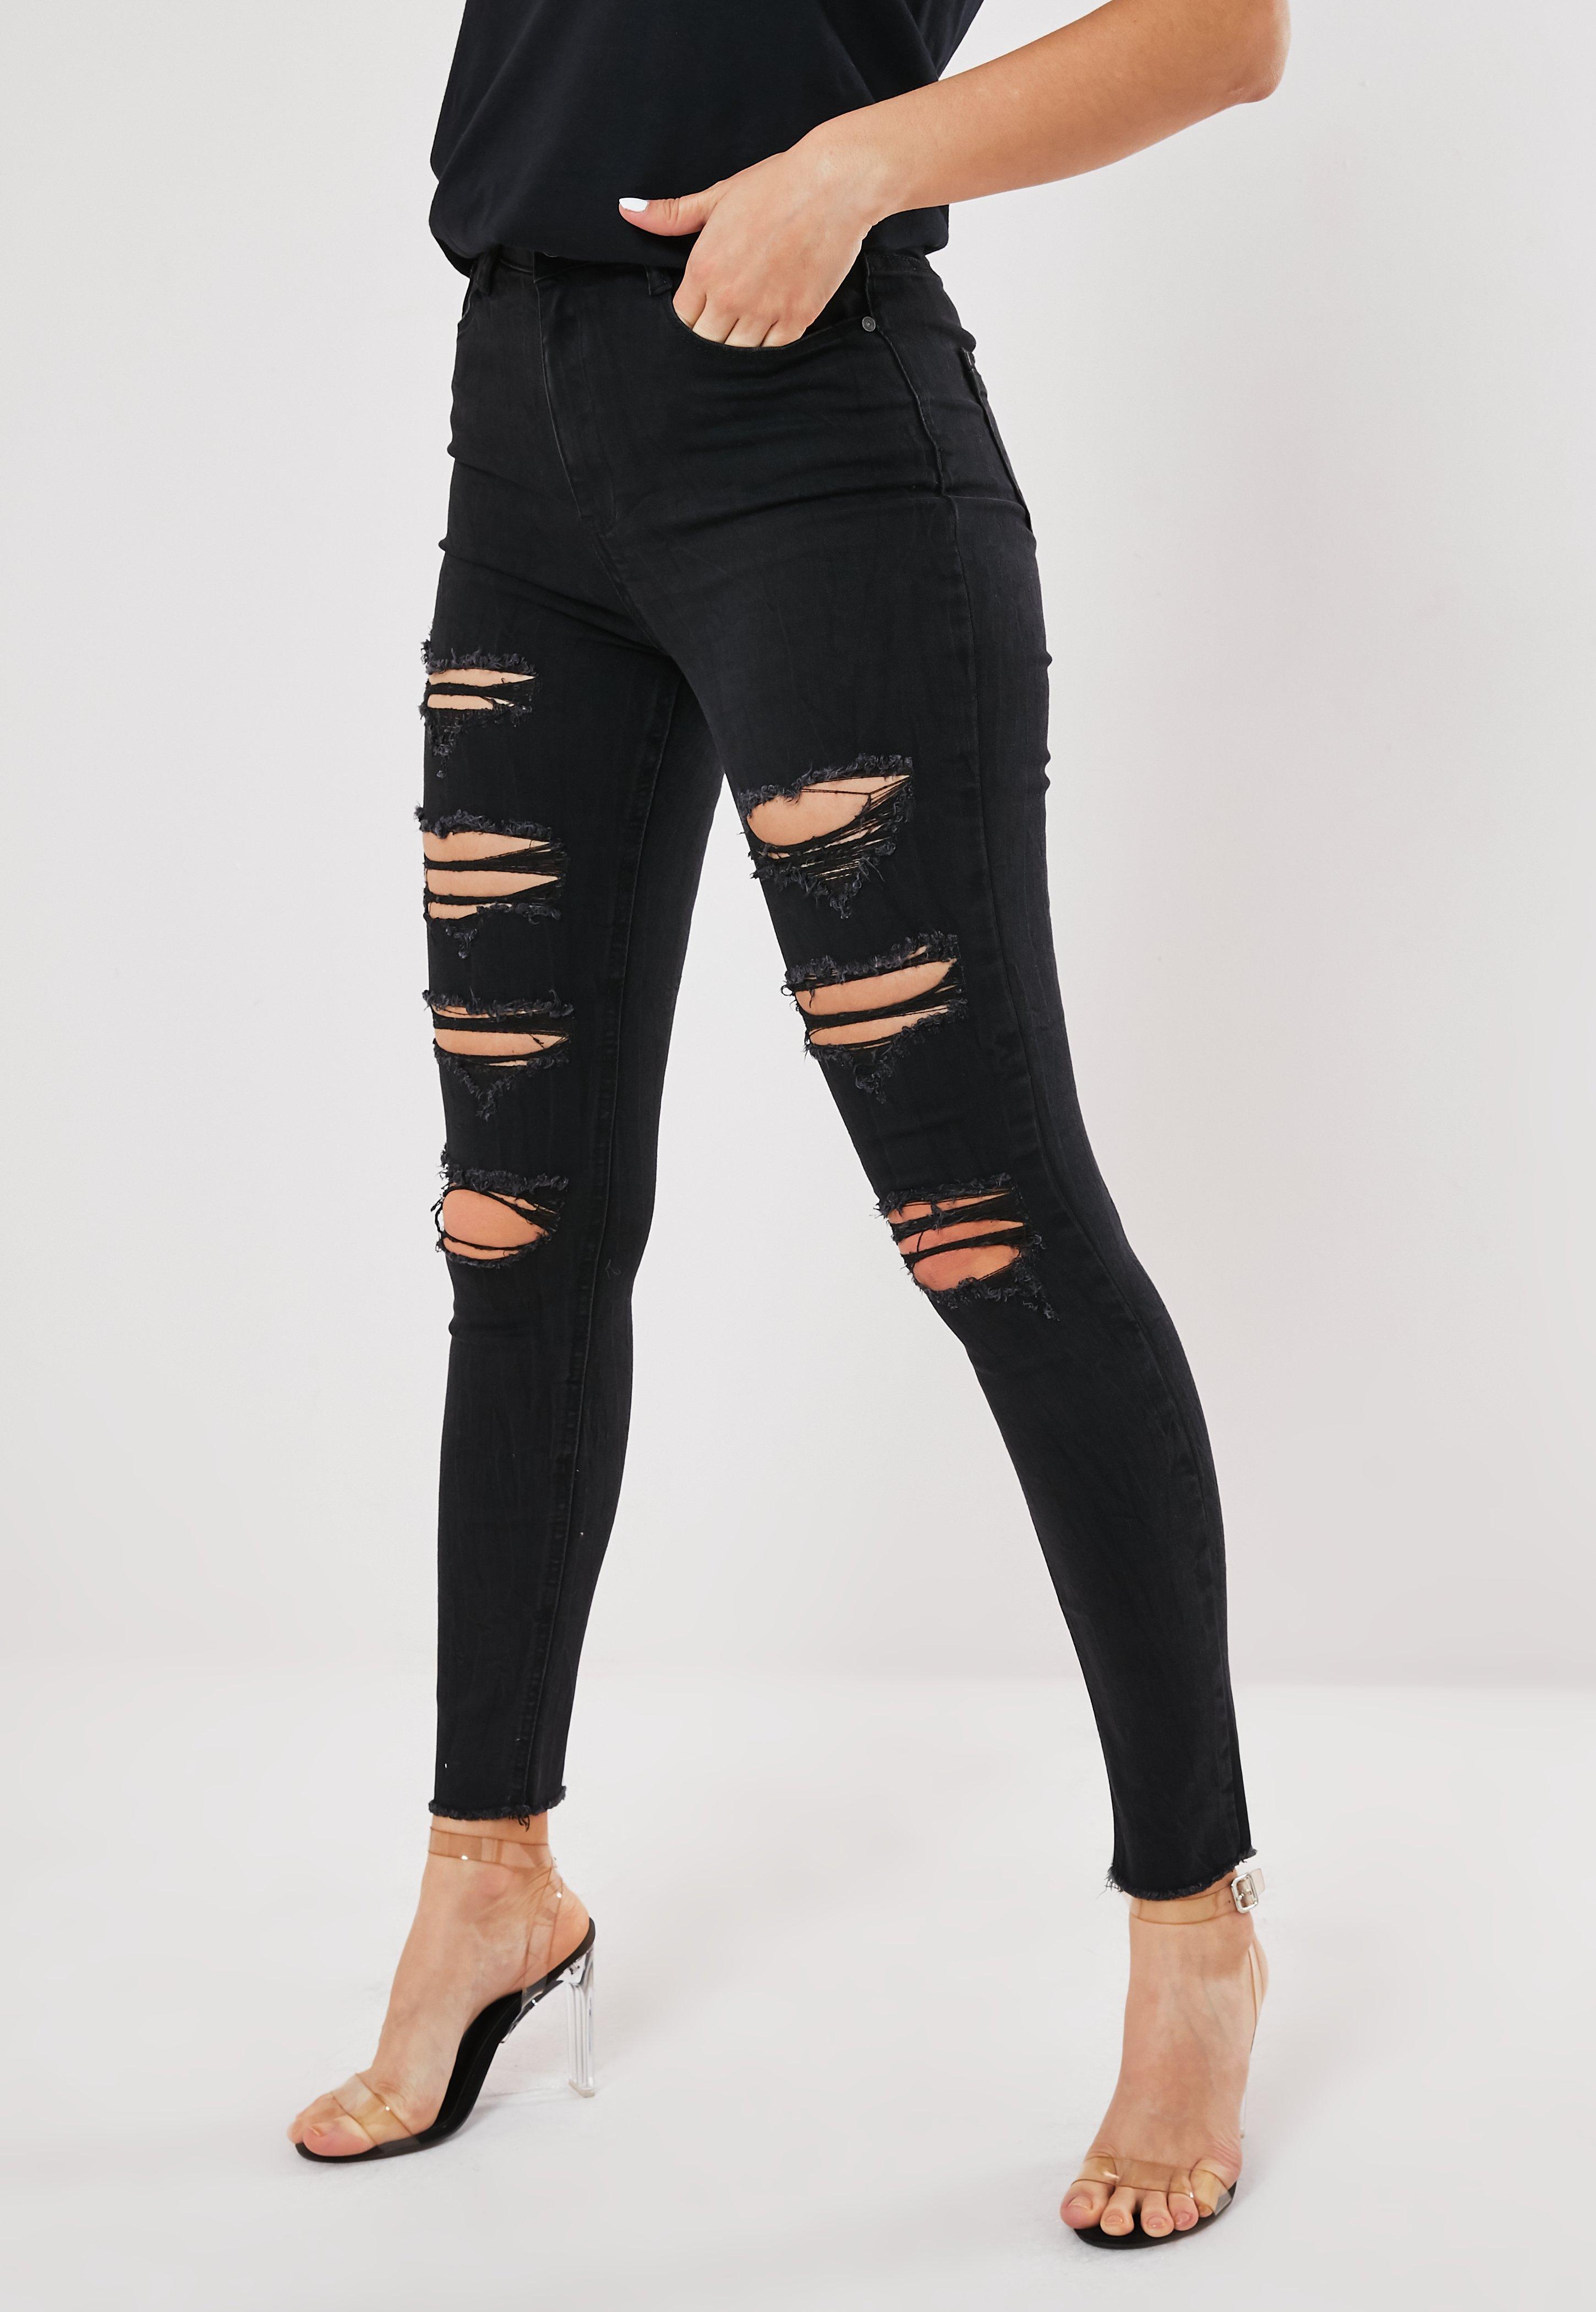 Missguided Denim High Waisted Extreme Ripped Skinny Jeans in Black - Lyst